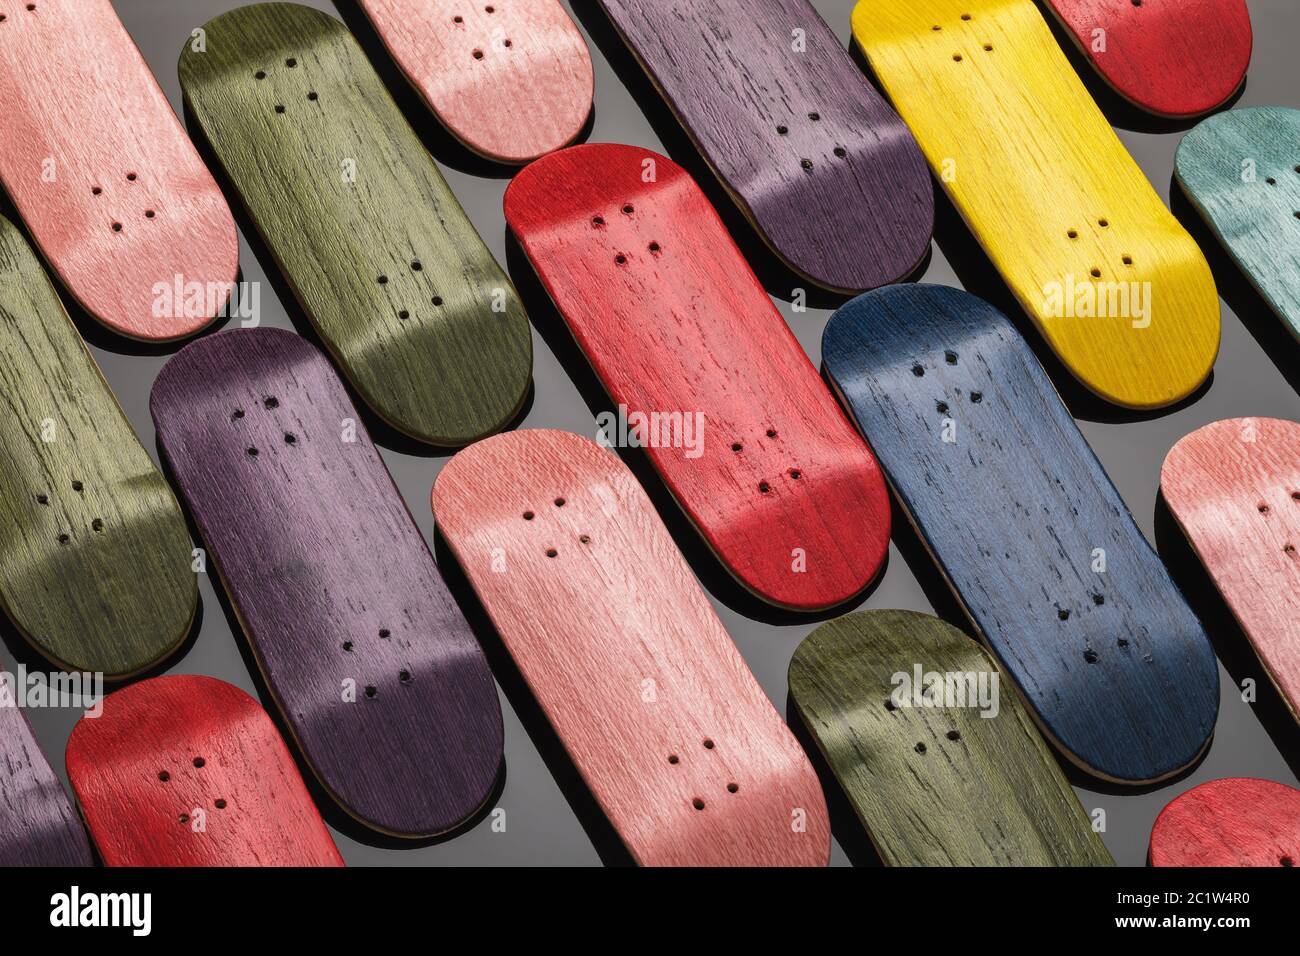 Background of multi-colored wooden boards for fingerboards Stock Photo